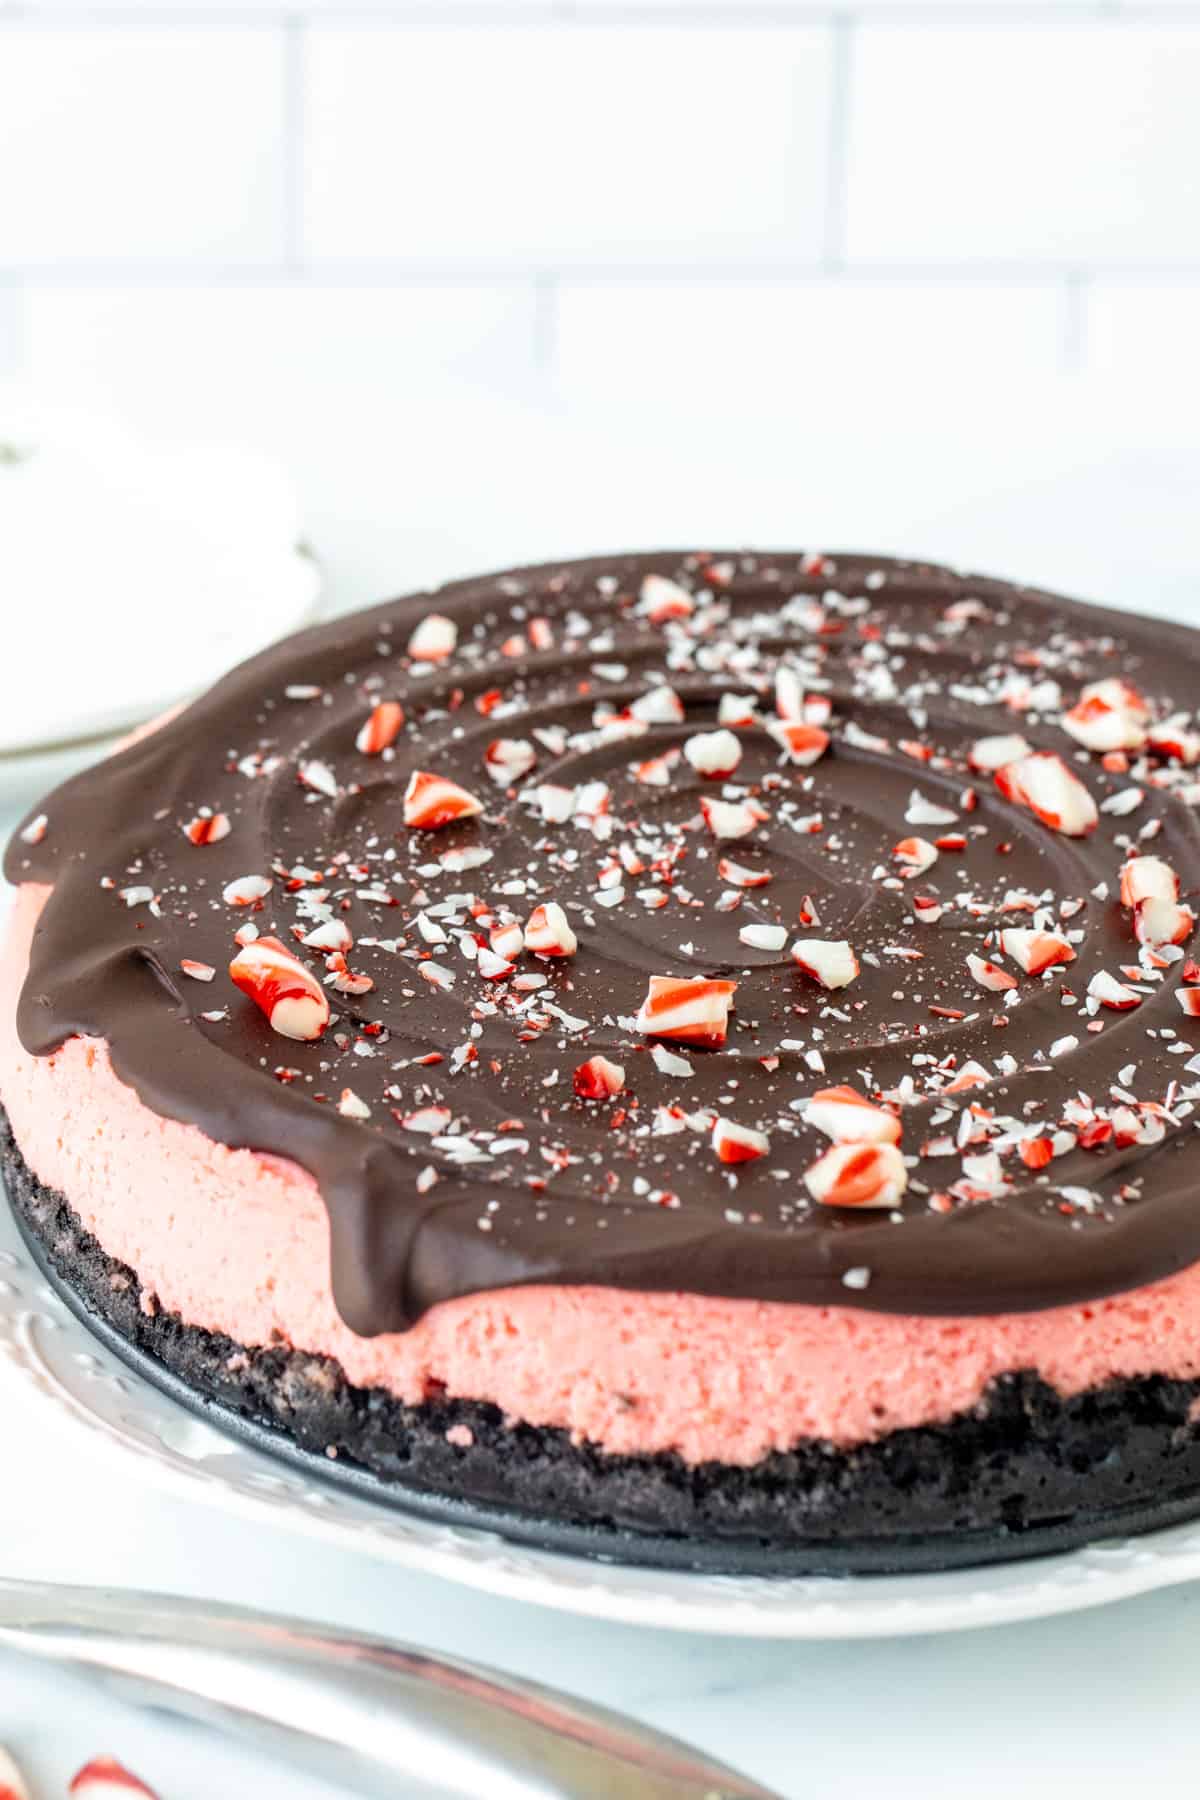 9-inch round peppermint cheesecake topped with chocolate ganache and crushed candy canes